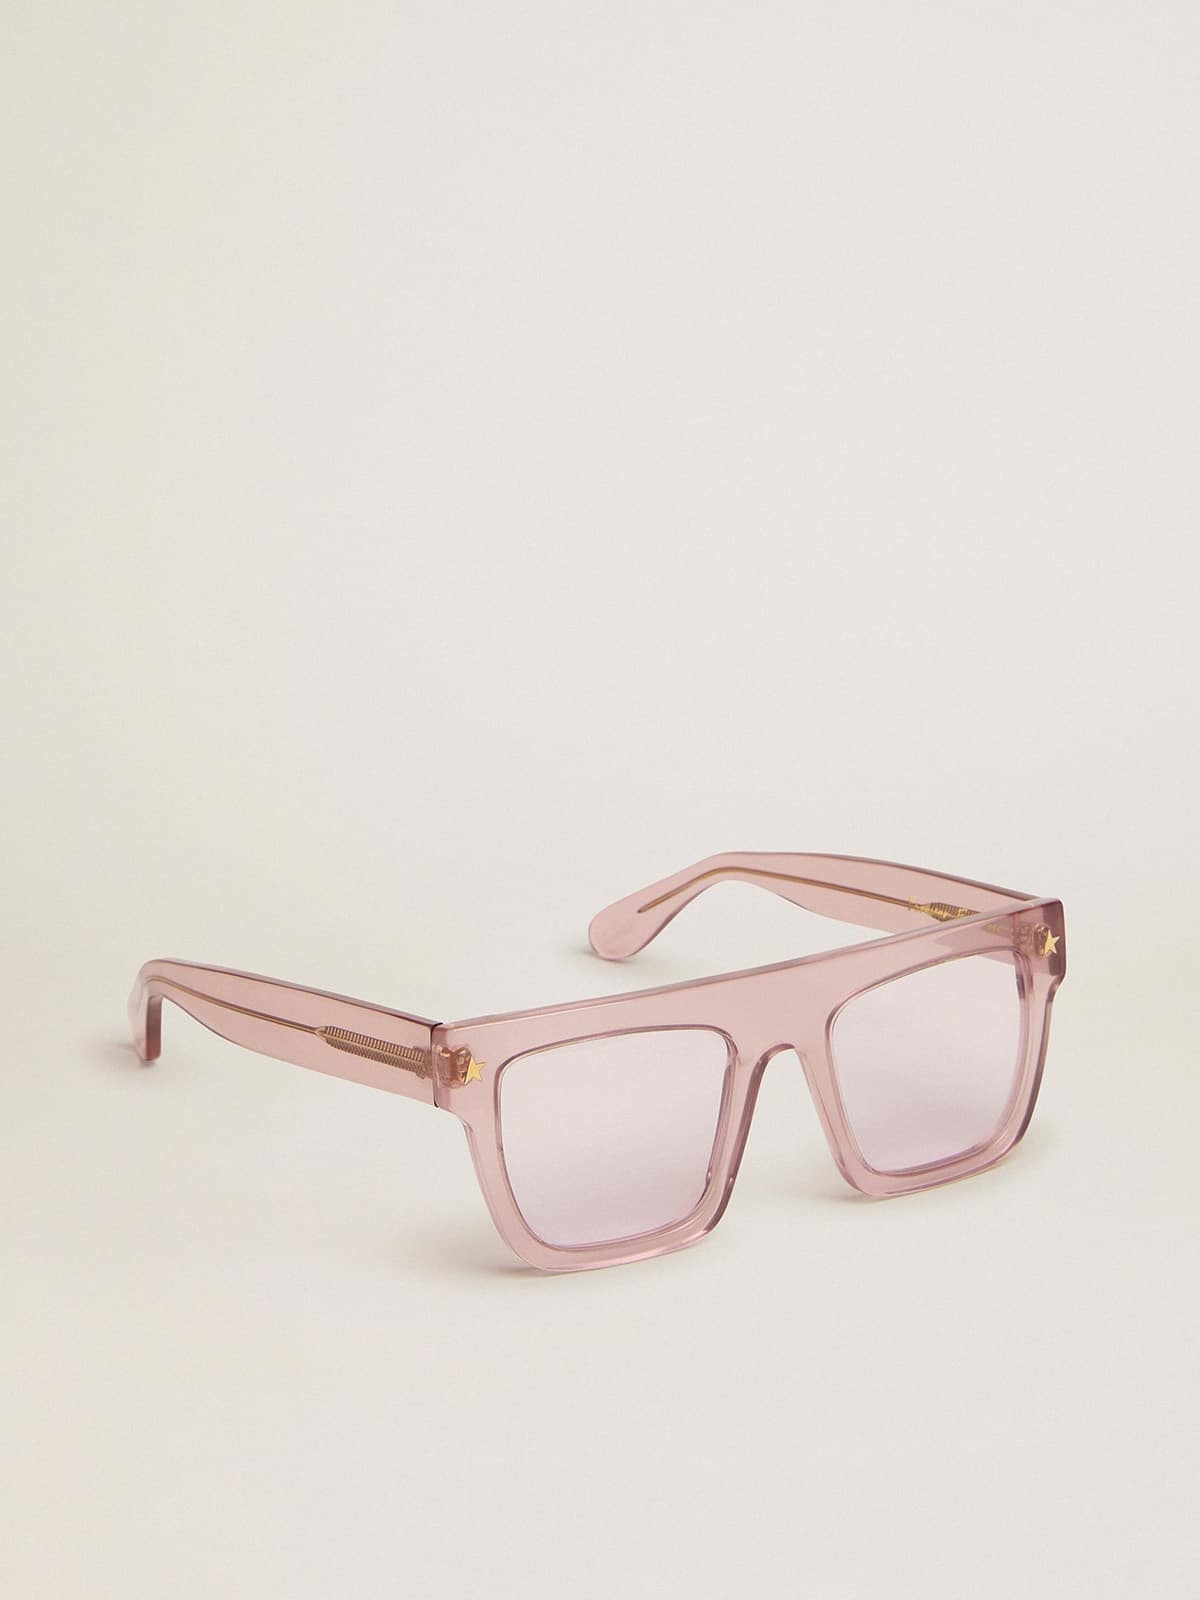 Square-style Sunframe Jamie with clear pink frame and pink lenses - 1